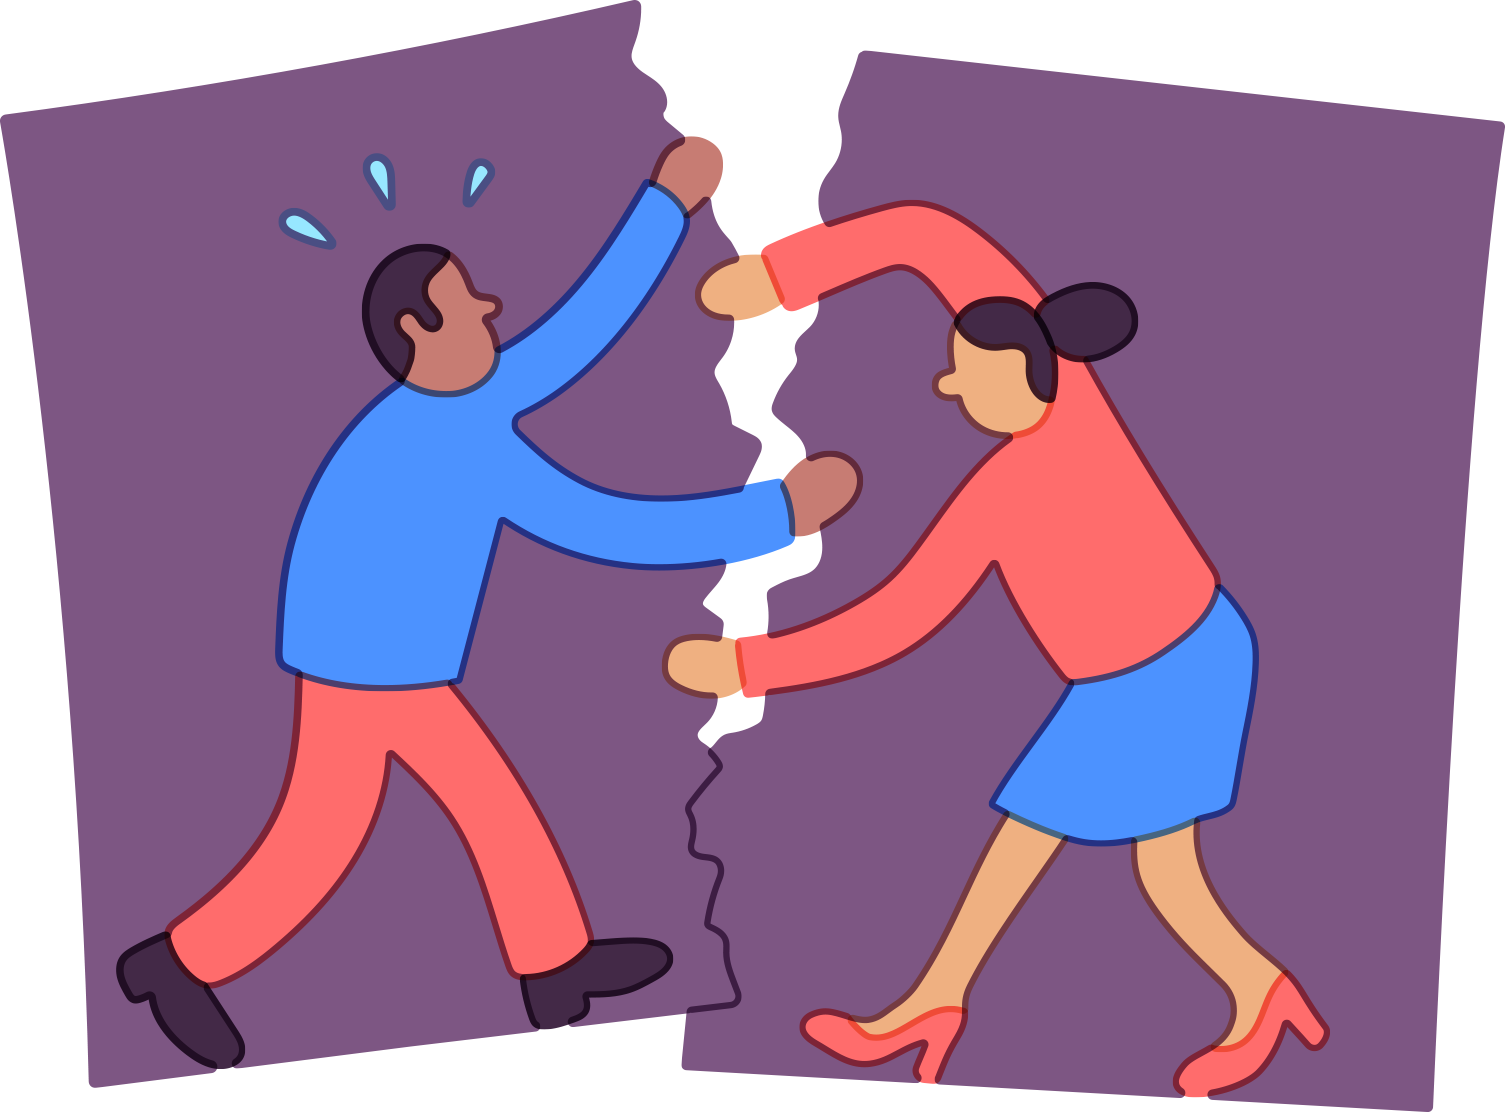 illustration of a couple in oposite colored clothes of blue and red pieces attempting to hold together a split purple and torn backdrop.